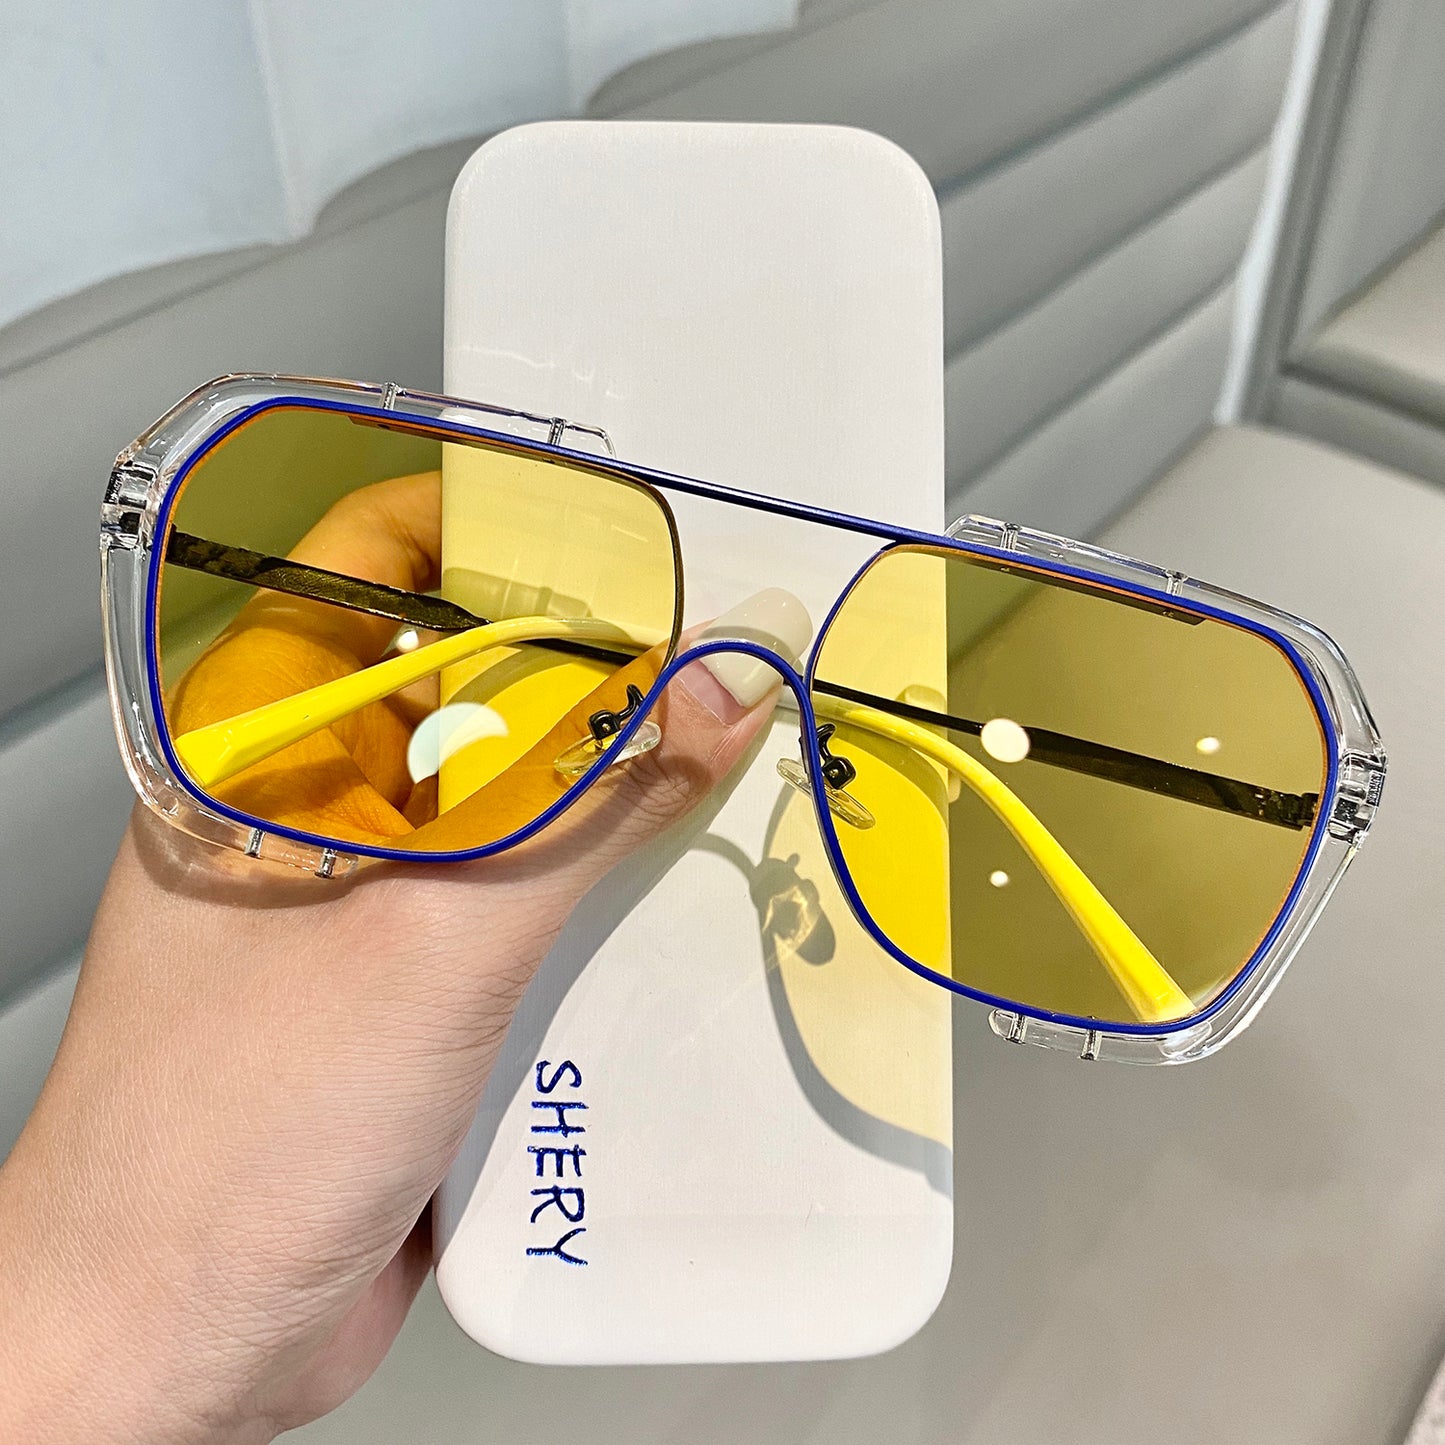 One-Piece Big Frame Square Sunglasses Female Yellow Sunglasses For Men Driving Uv Protection